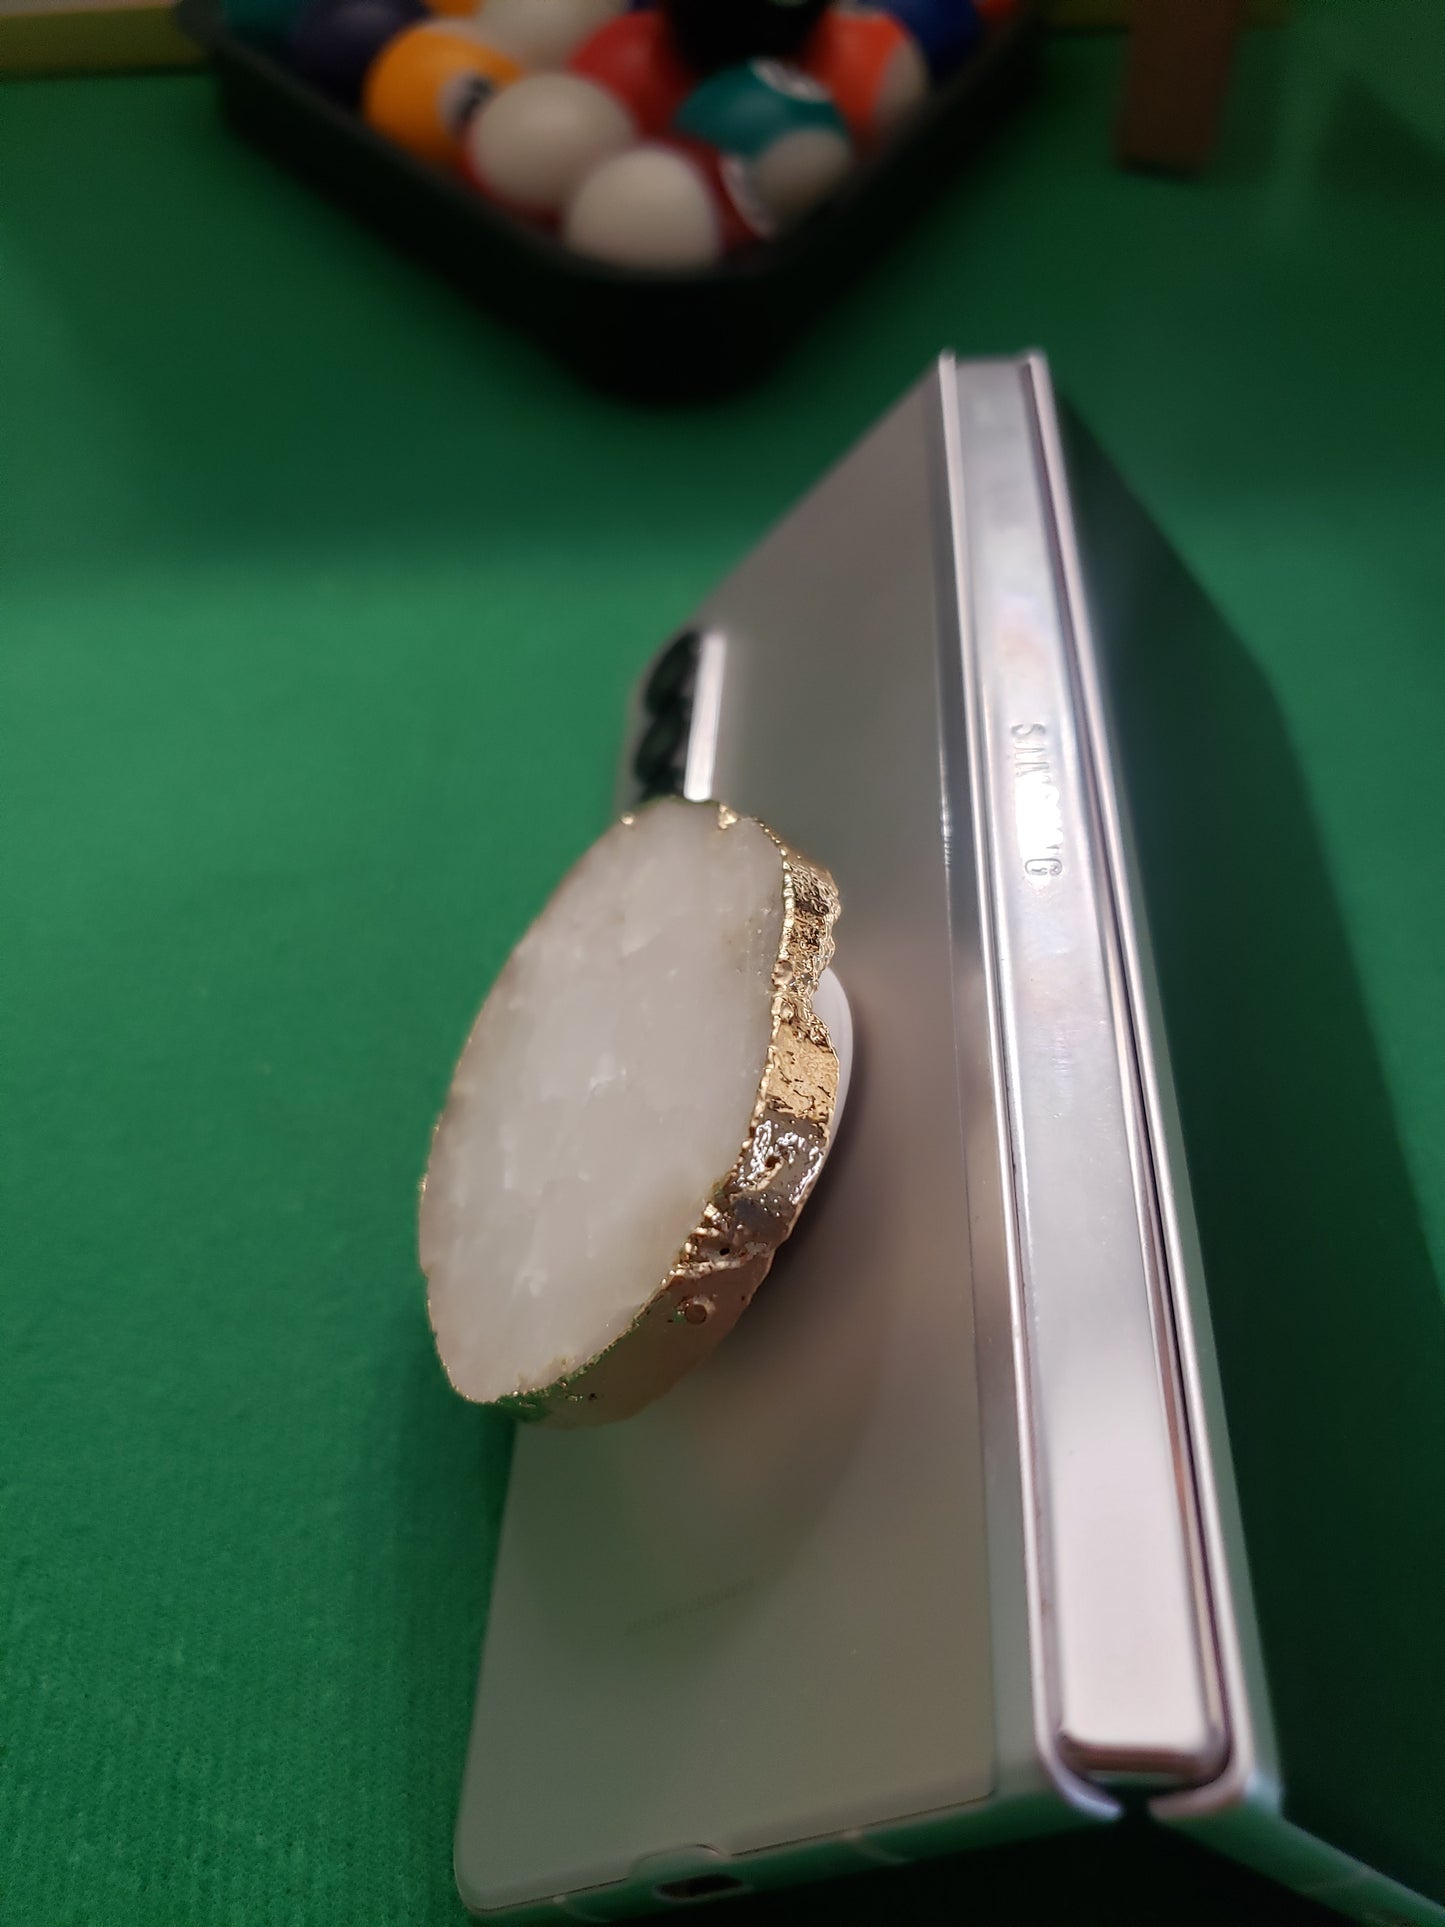 PopSockets: 24k Authentic Genuine Crystal Gemstone Phone Grips        (📌Free Shipping)